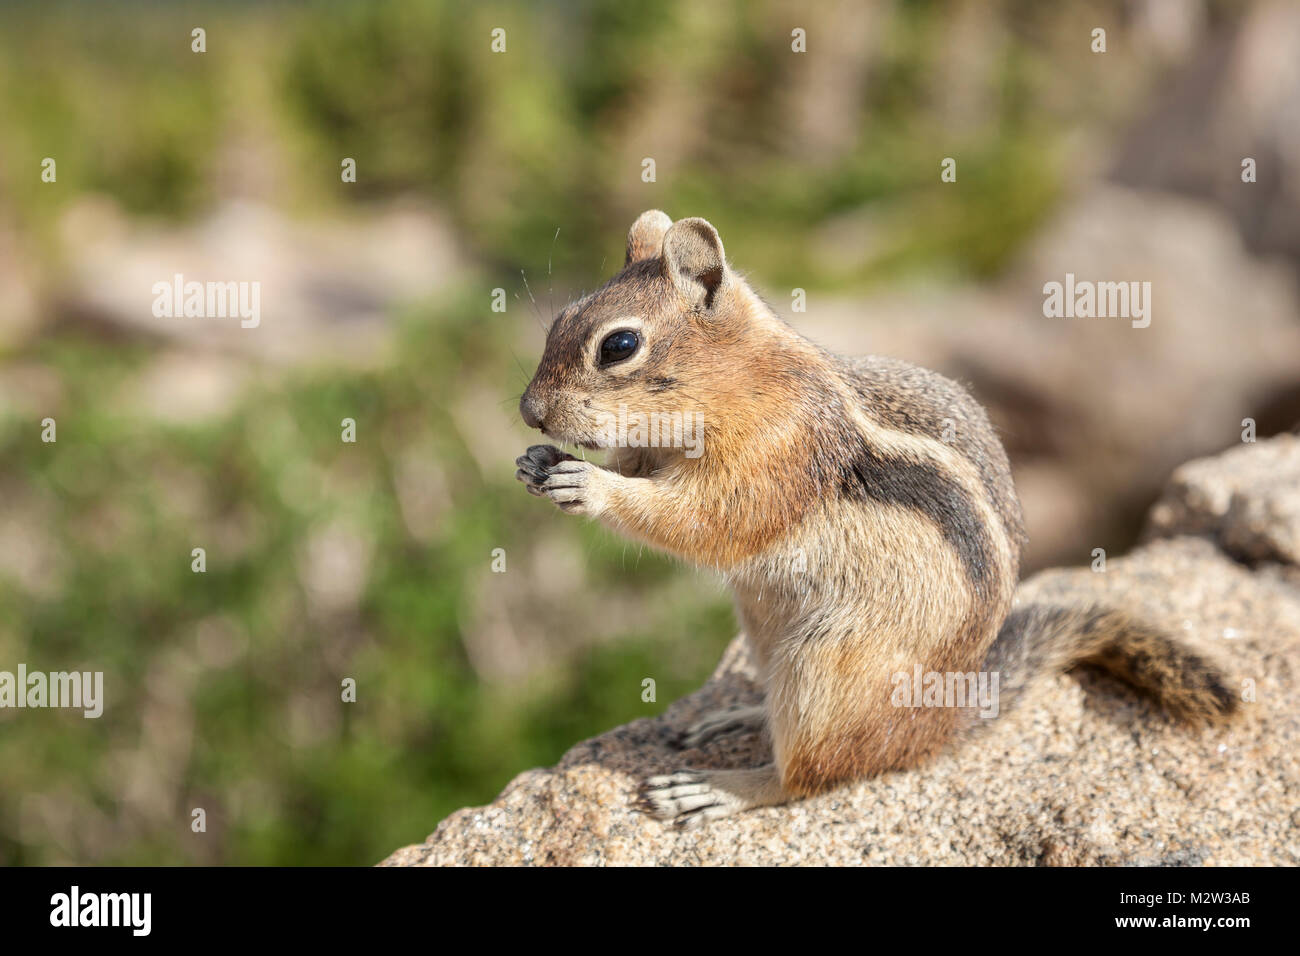 Chipmunk standing on a rock eating. Chipmunks are small, striped rodents of the family Sciuridae. Stock Photo